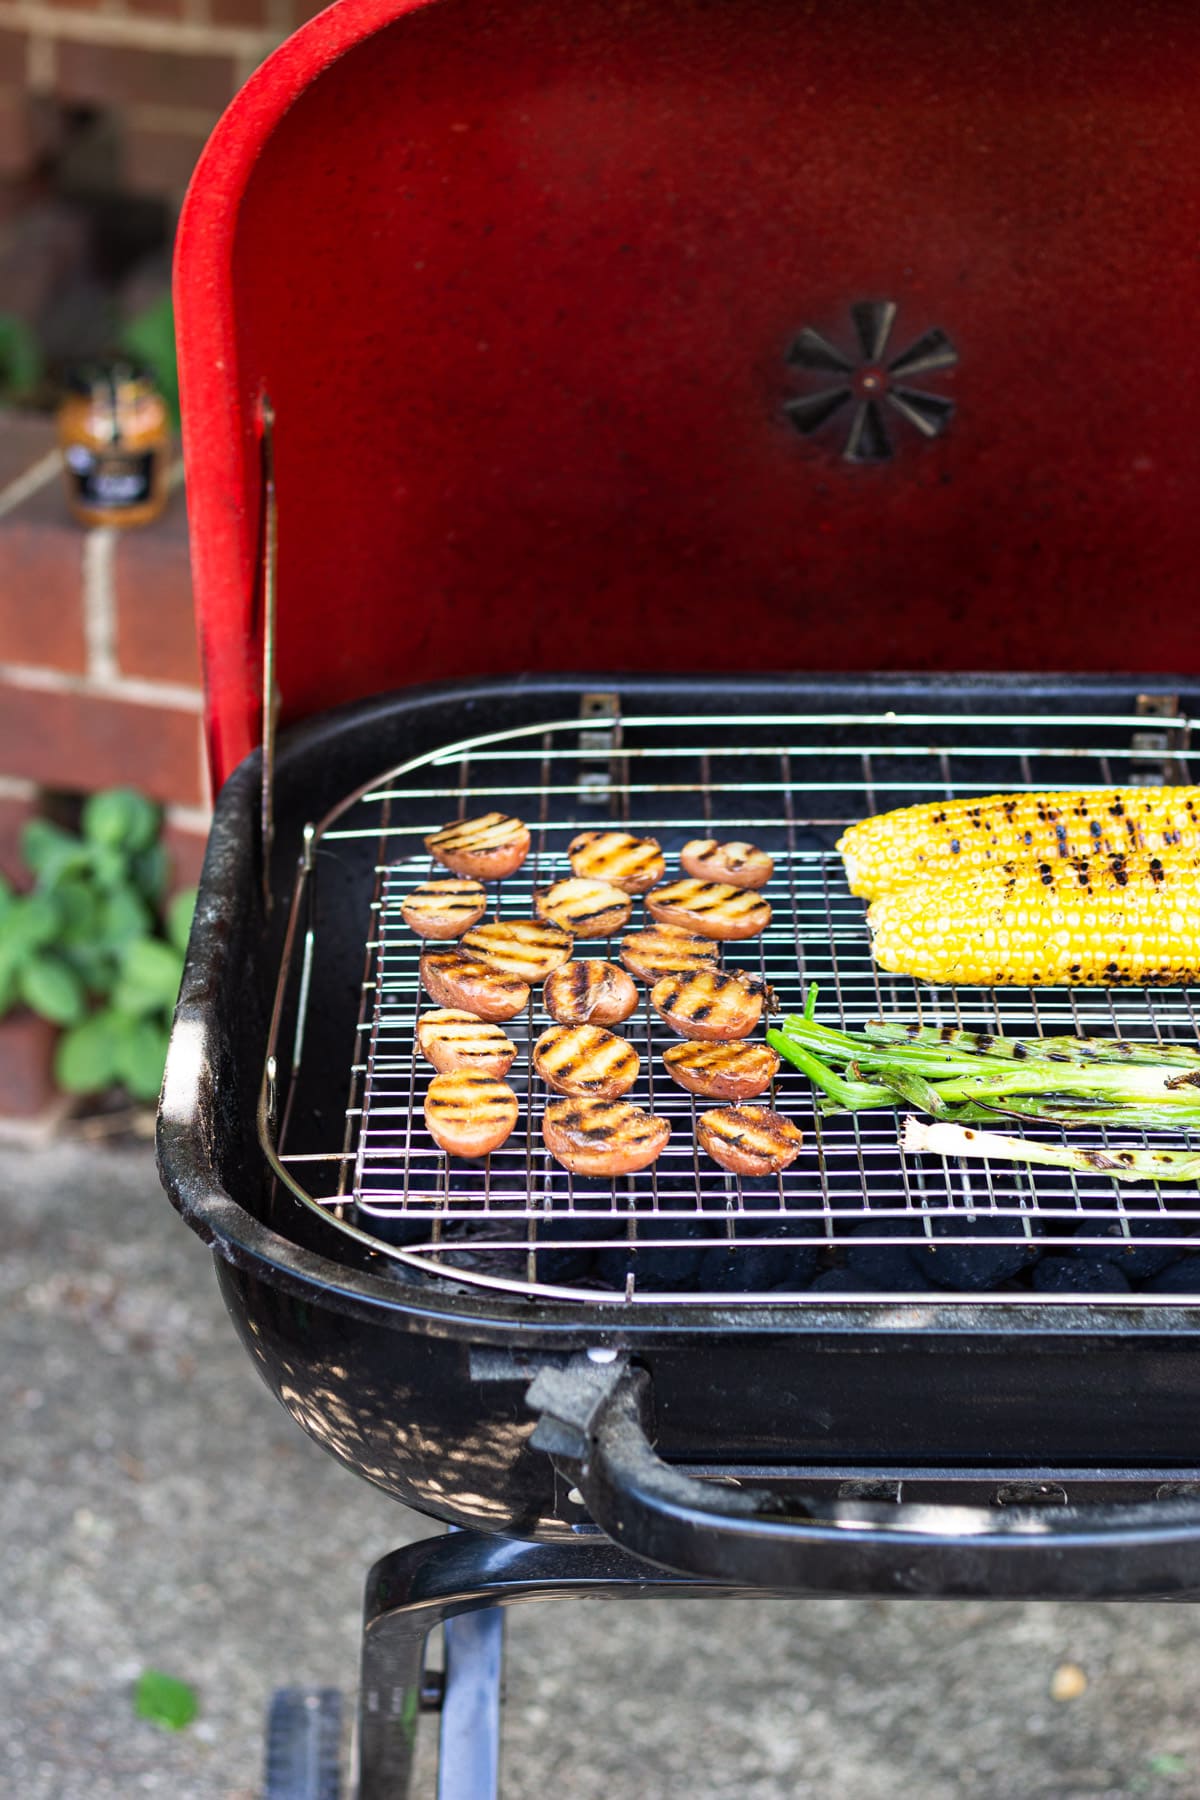 Red potatoes, corn on the cob and scallions on an outdoor grill.